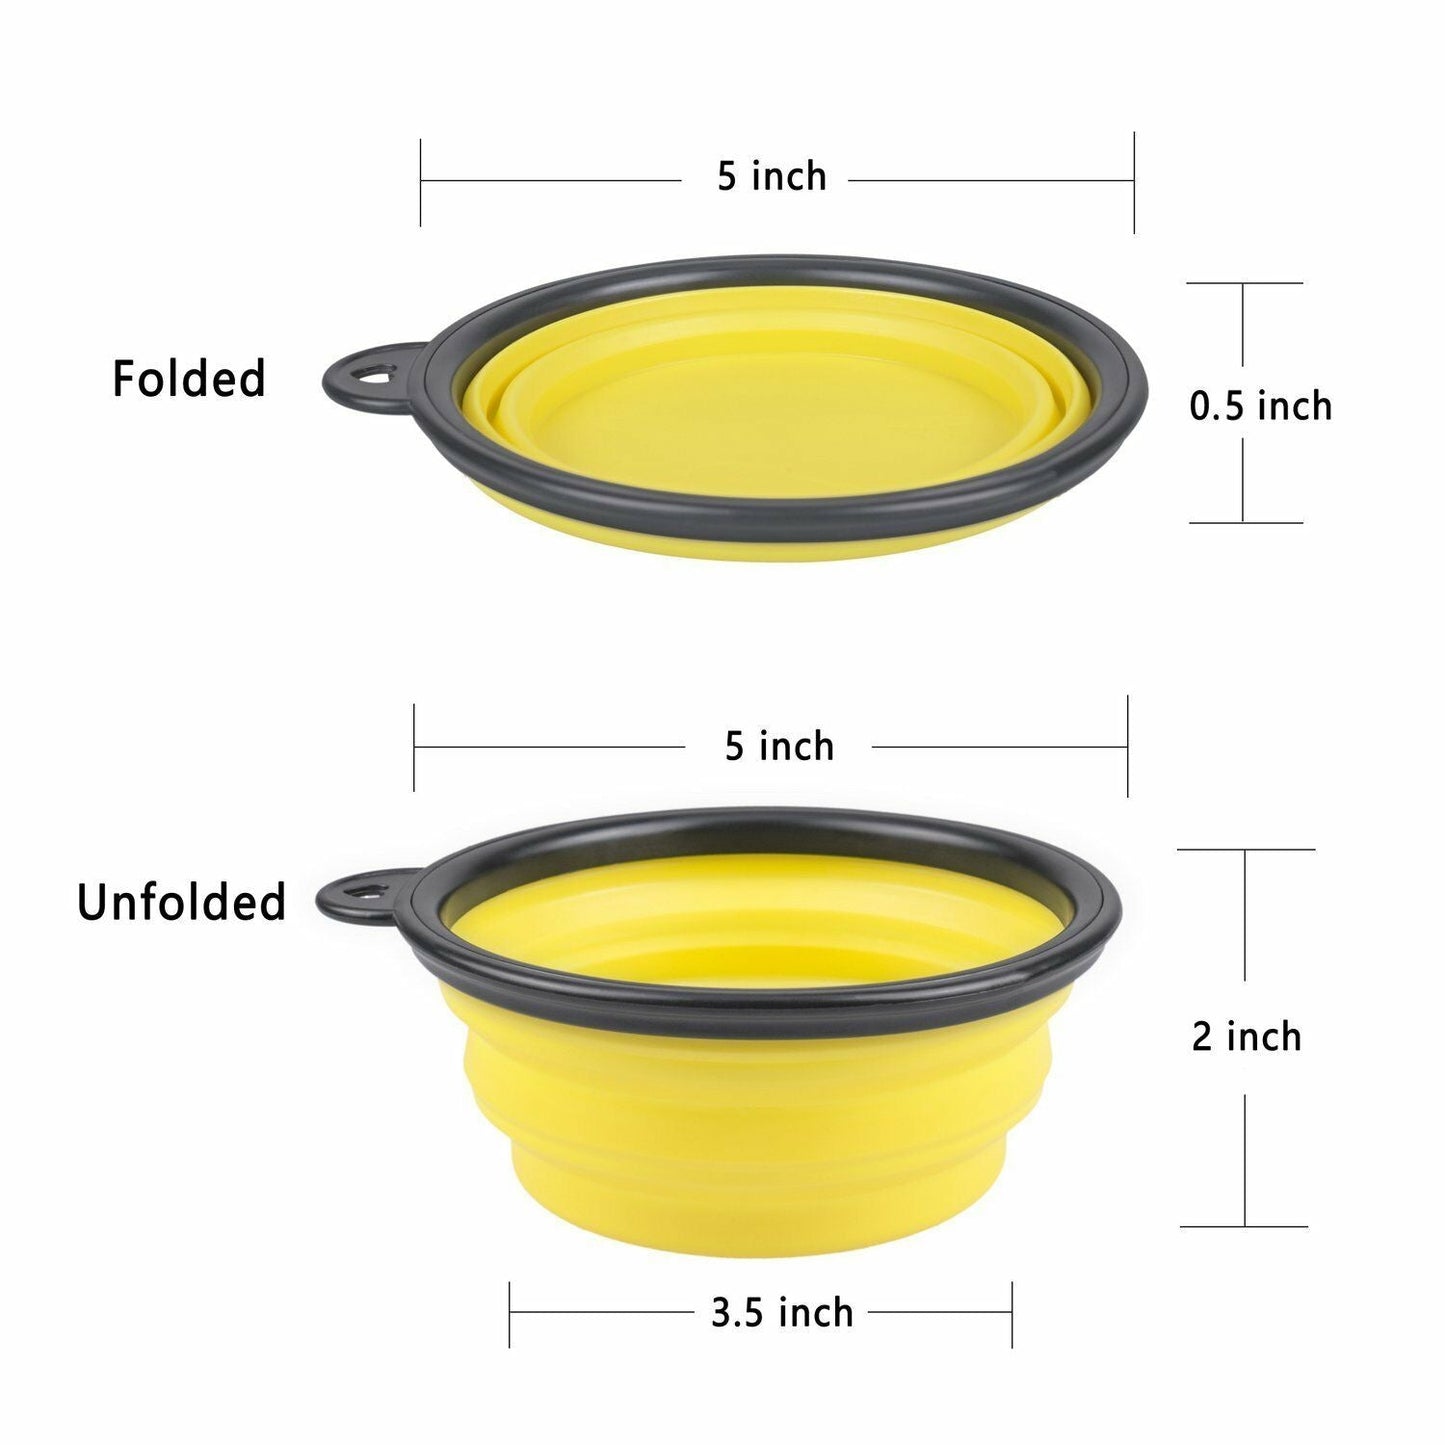 4 Portable Travel Collapsible Foldable Pet Dog Bowl for Food & Water Bowls Dish by Plugsus Home Furniture